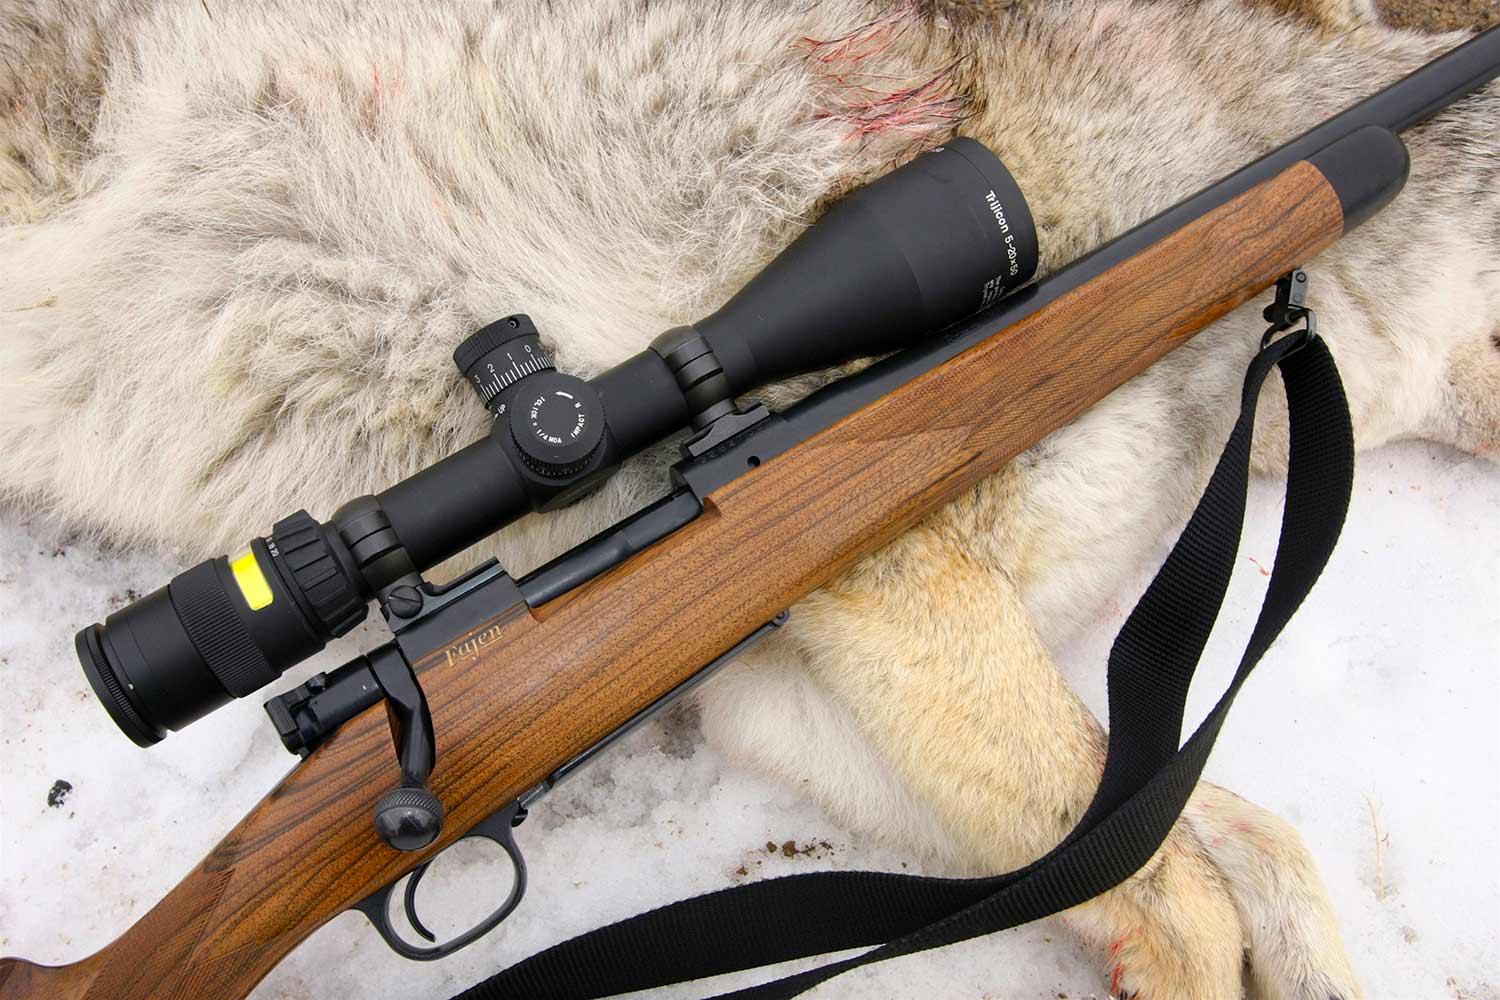 hunting rifle equipped with a Trijicon scope.